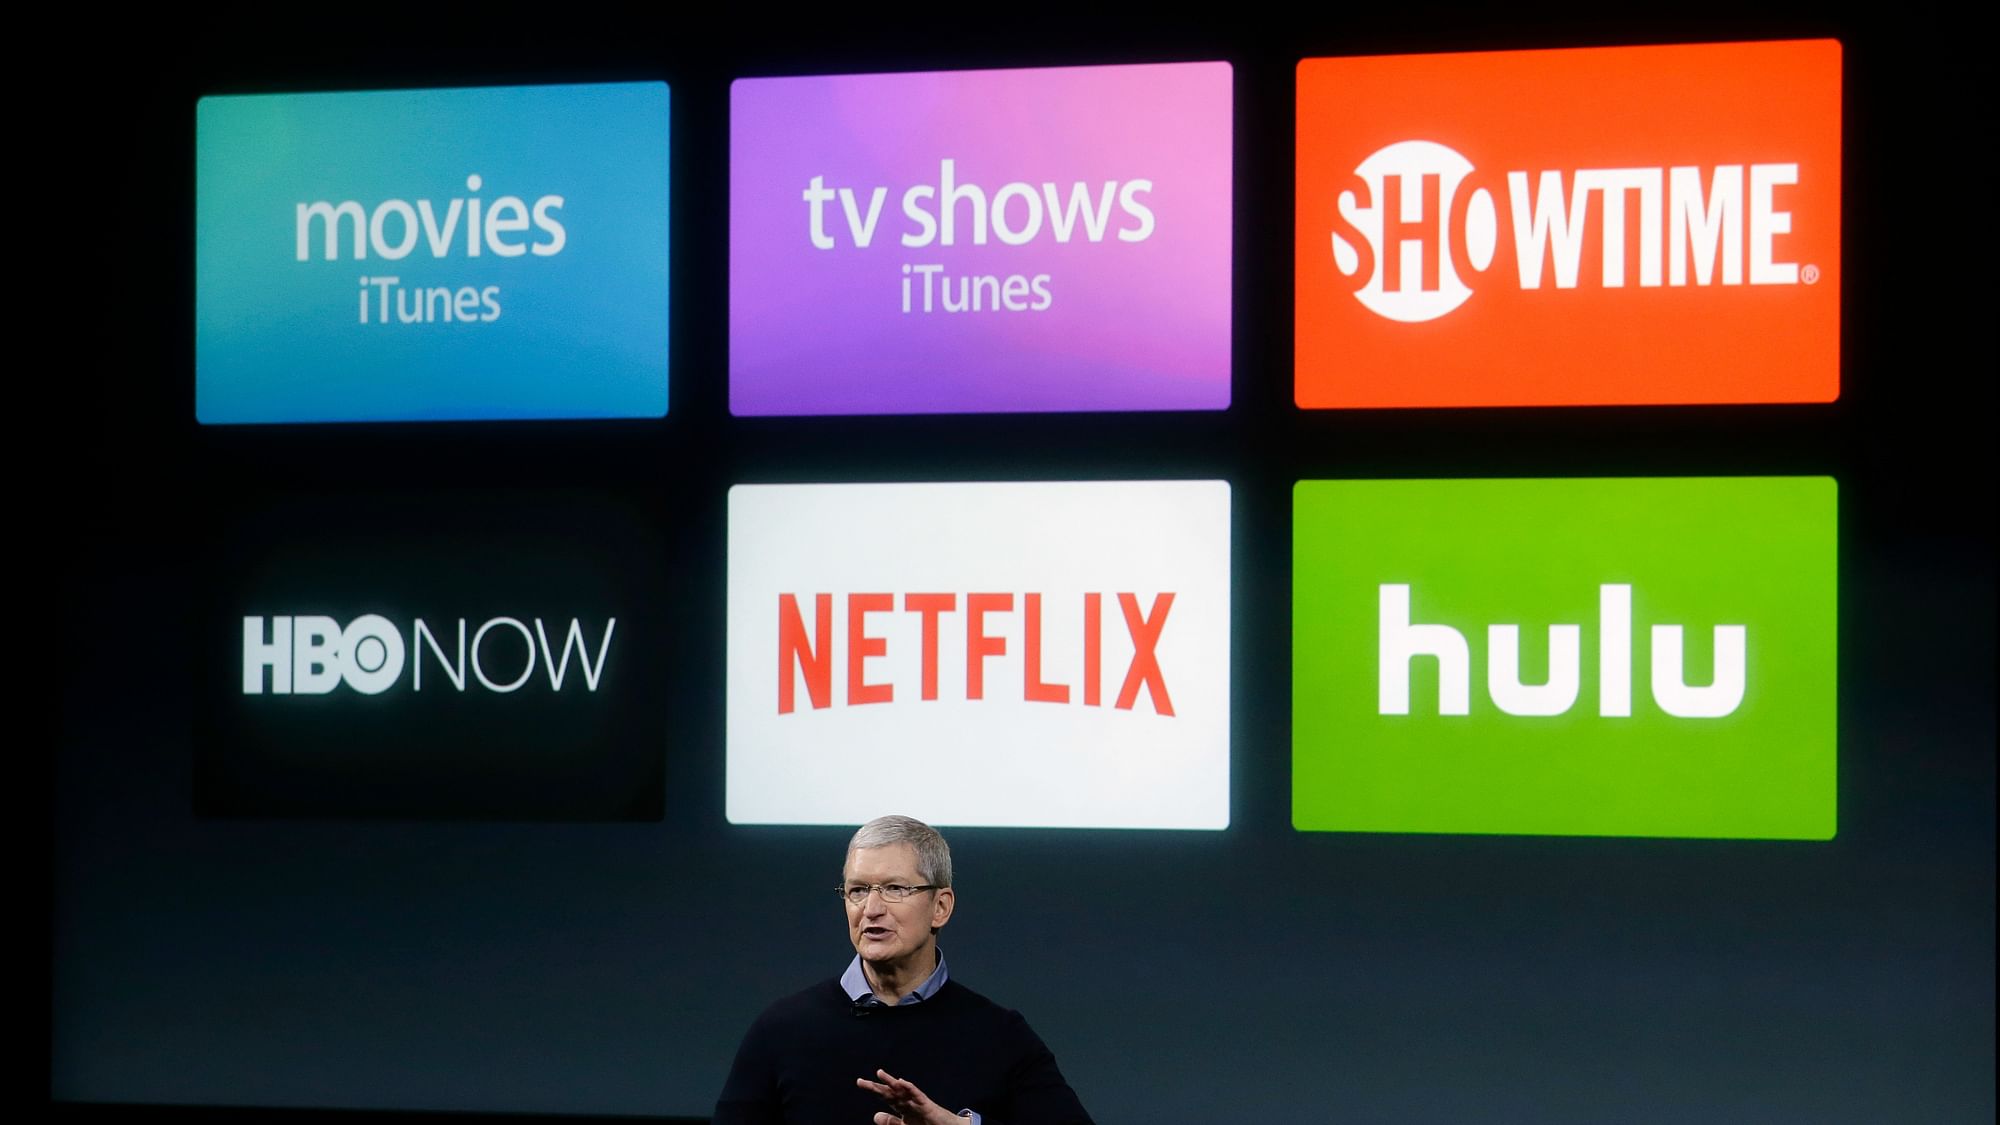 Apple CEO, Tim Cook, speaks at an event to announce new products from the company.&nbsp;